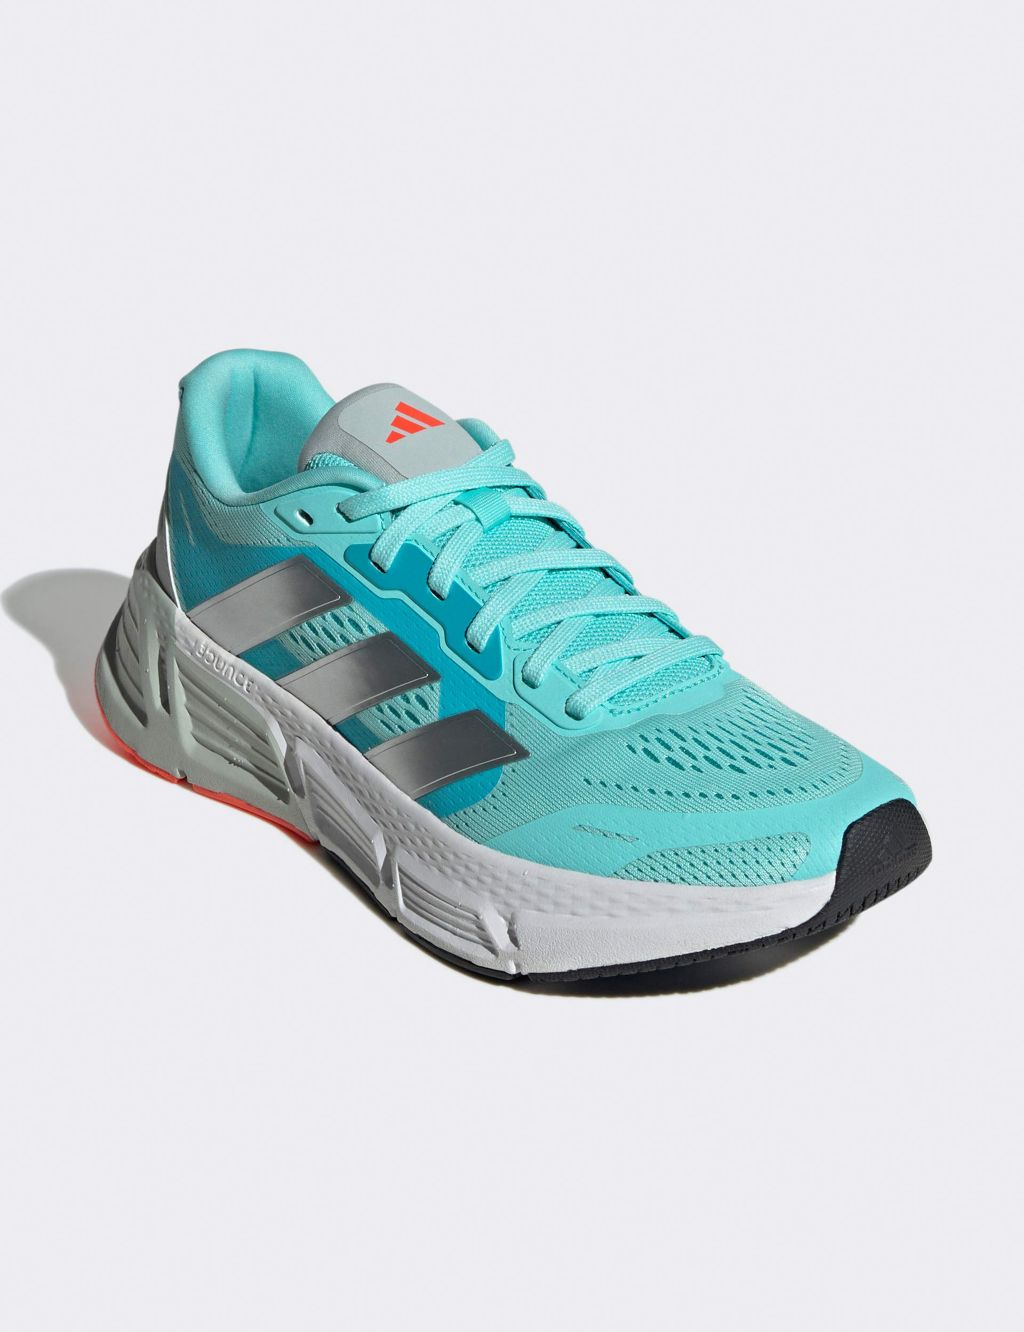 Questar 2 Bounce Running Trainers image 4